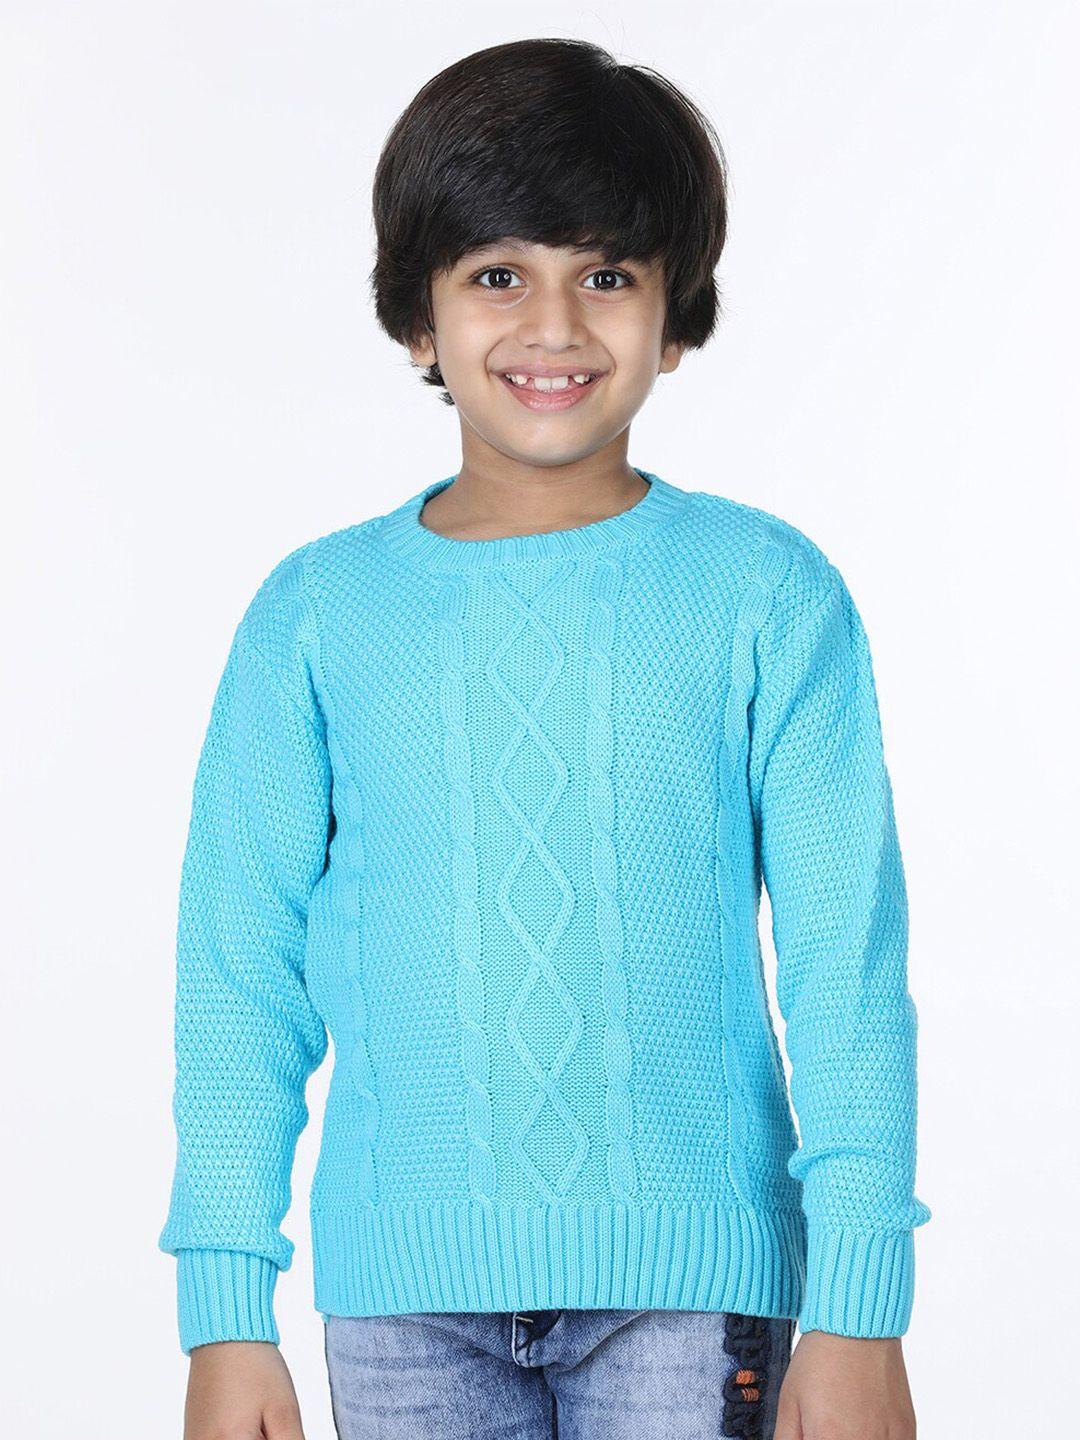 wingsfield-boys-cable-knit-acrylic-pullover